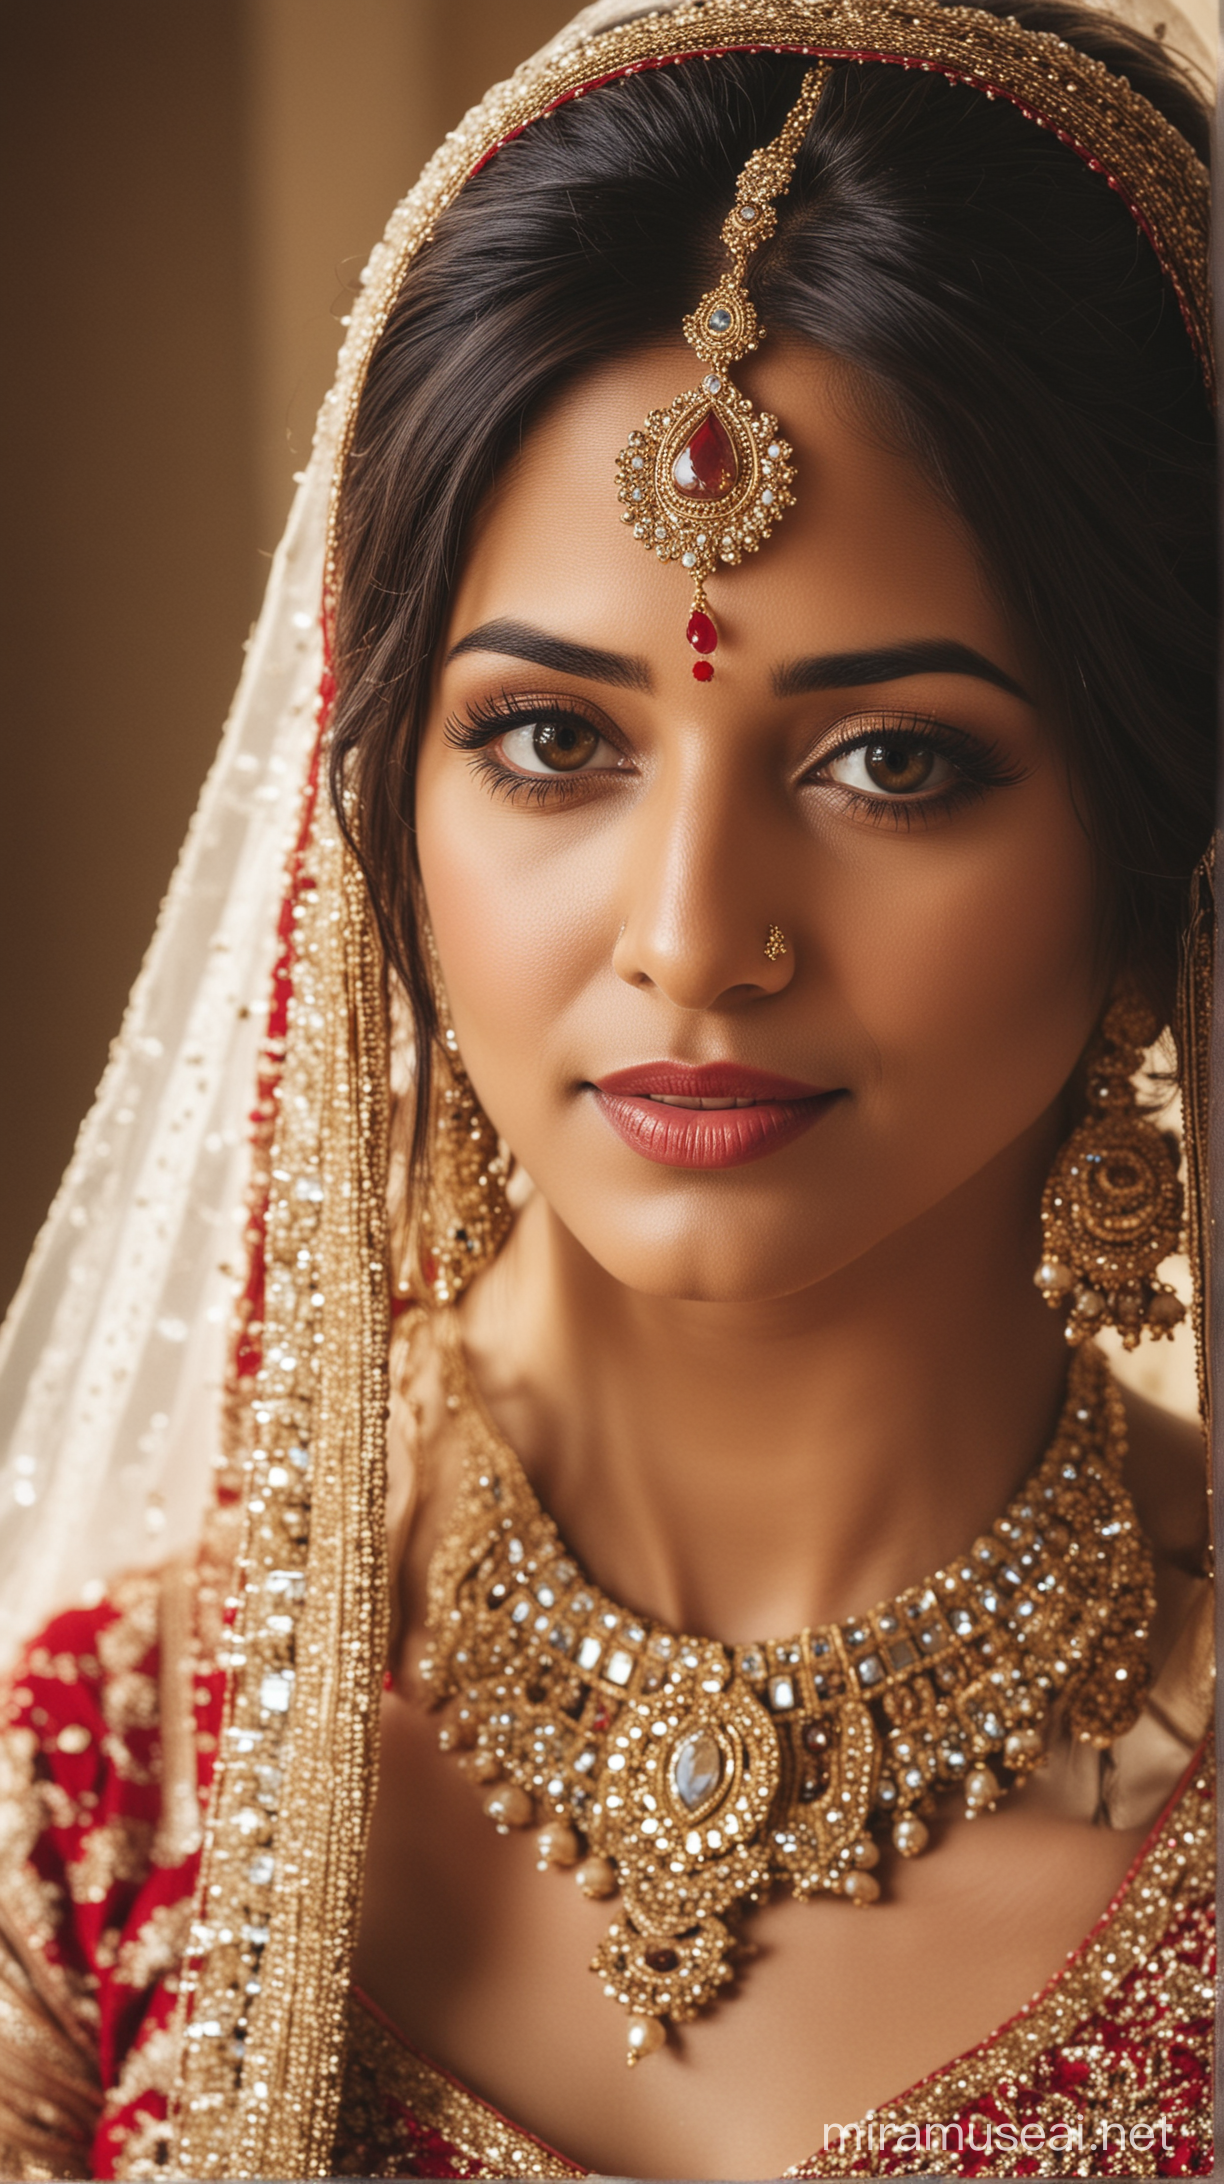 Traditional Indian Bride Wearing Vibrant Sari and Ornate Jewelry